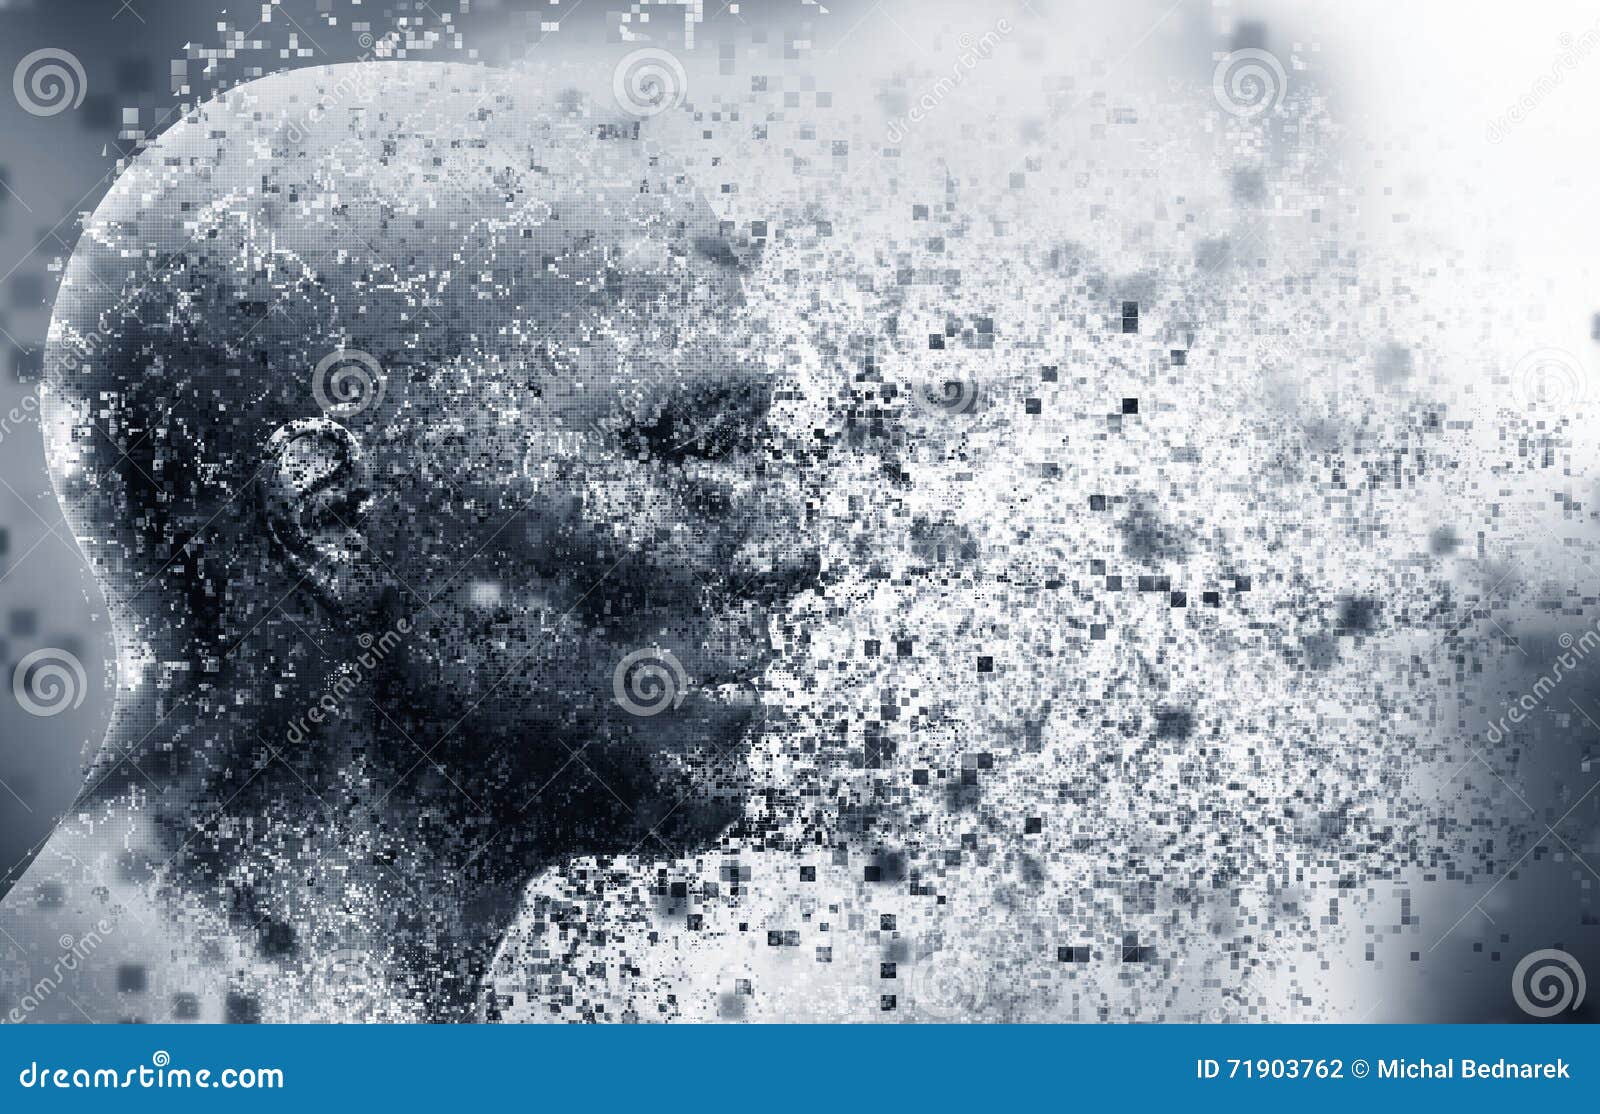 man face with pixel dispersion effect. concept of technology, modern science but also disintegration